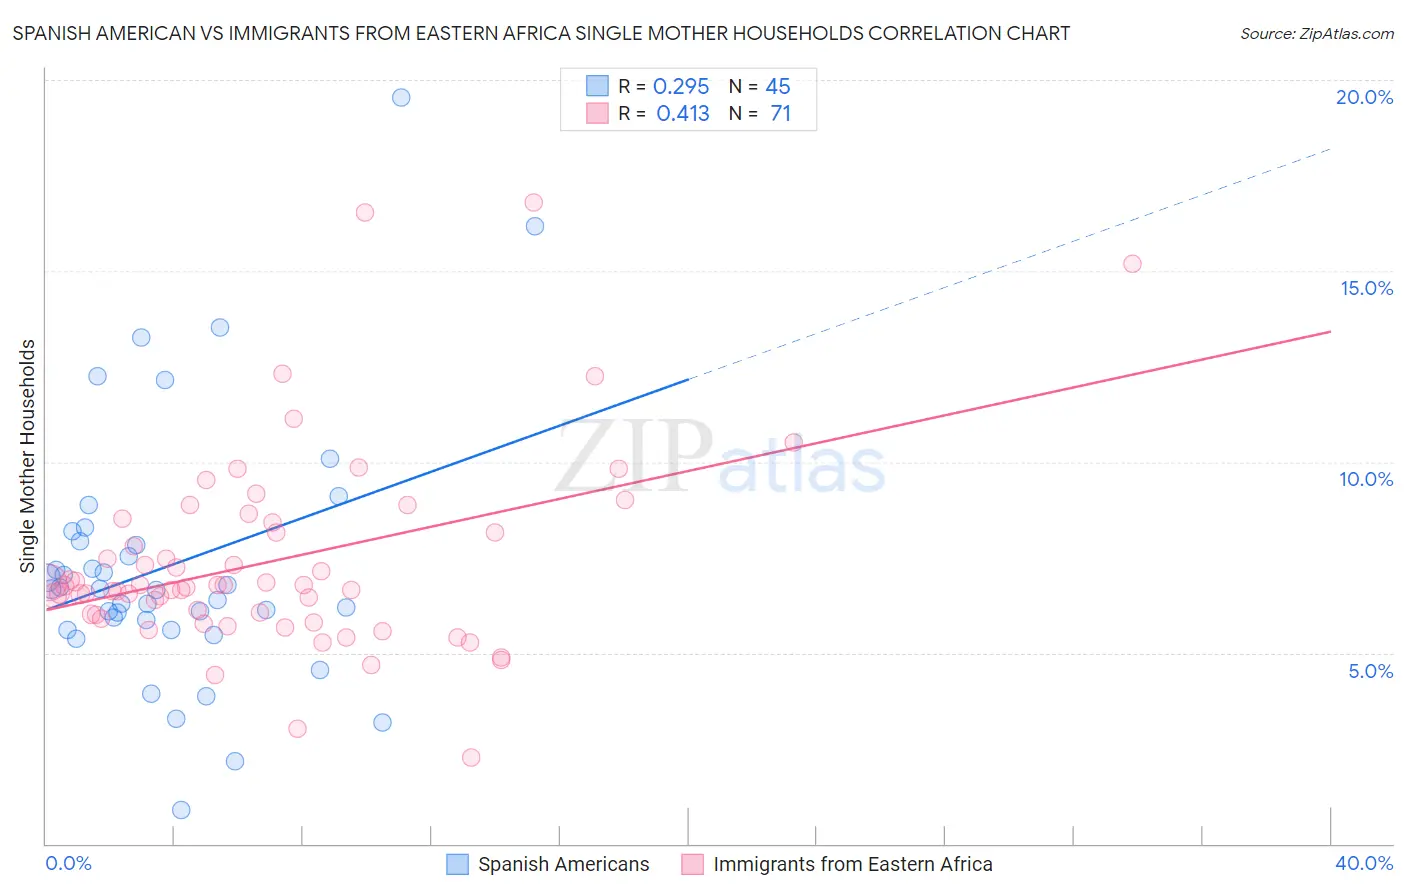 Spanish American vs Immigrants from Eastern Africa Single Mother Households